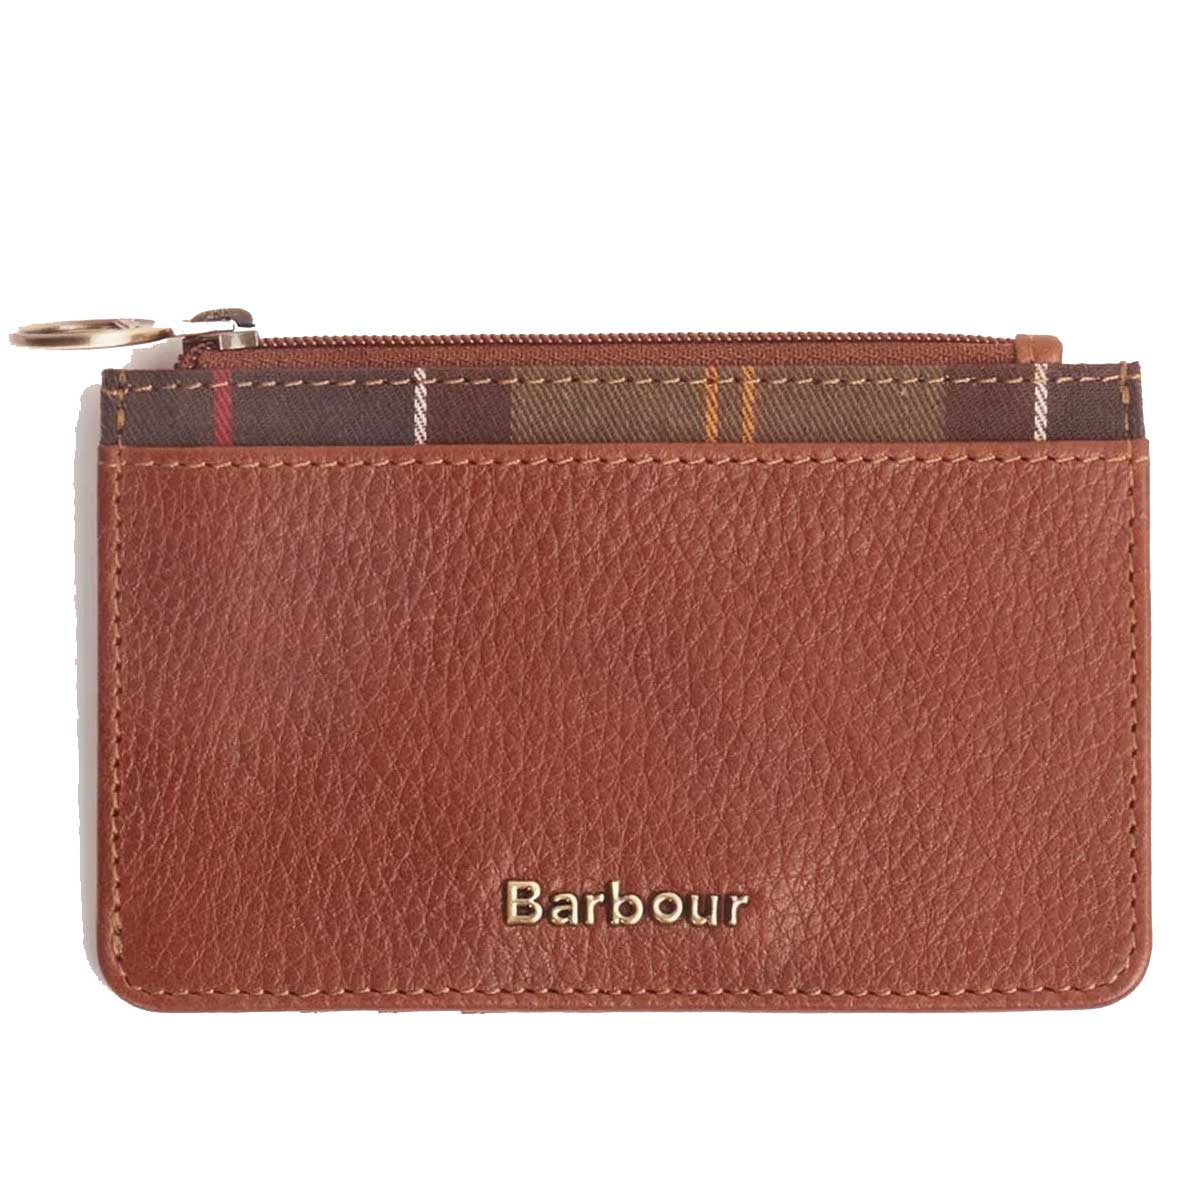 BARBOUR Laire Card Holder - Brown / Classic Tartan